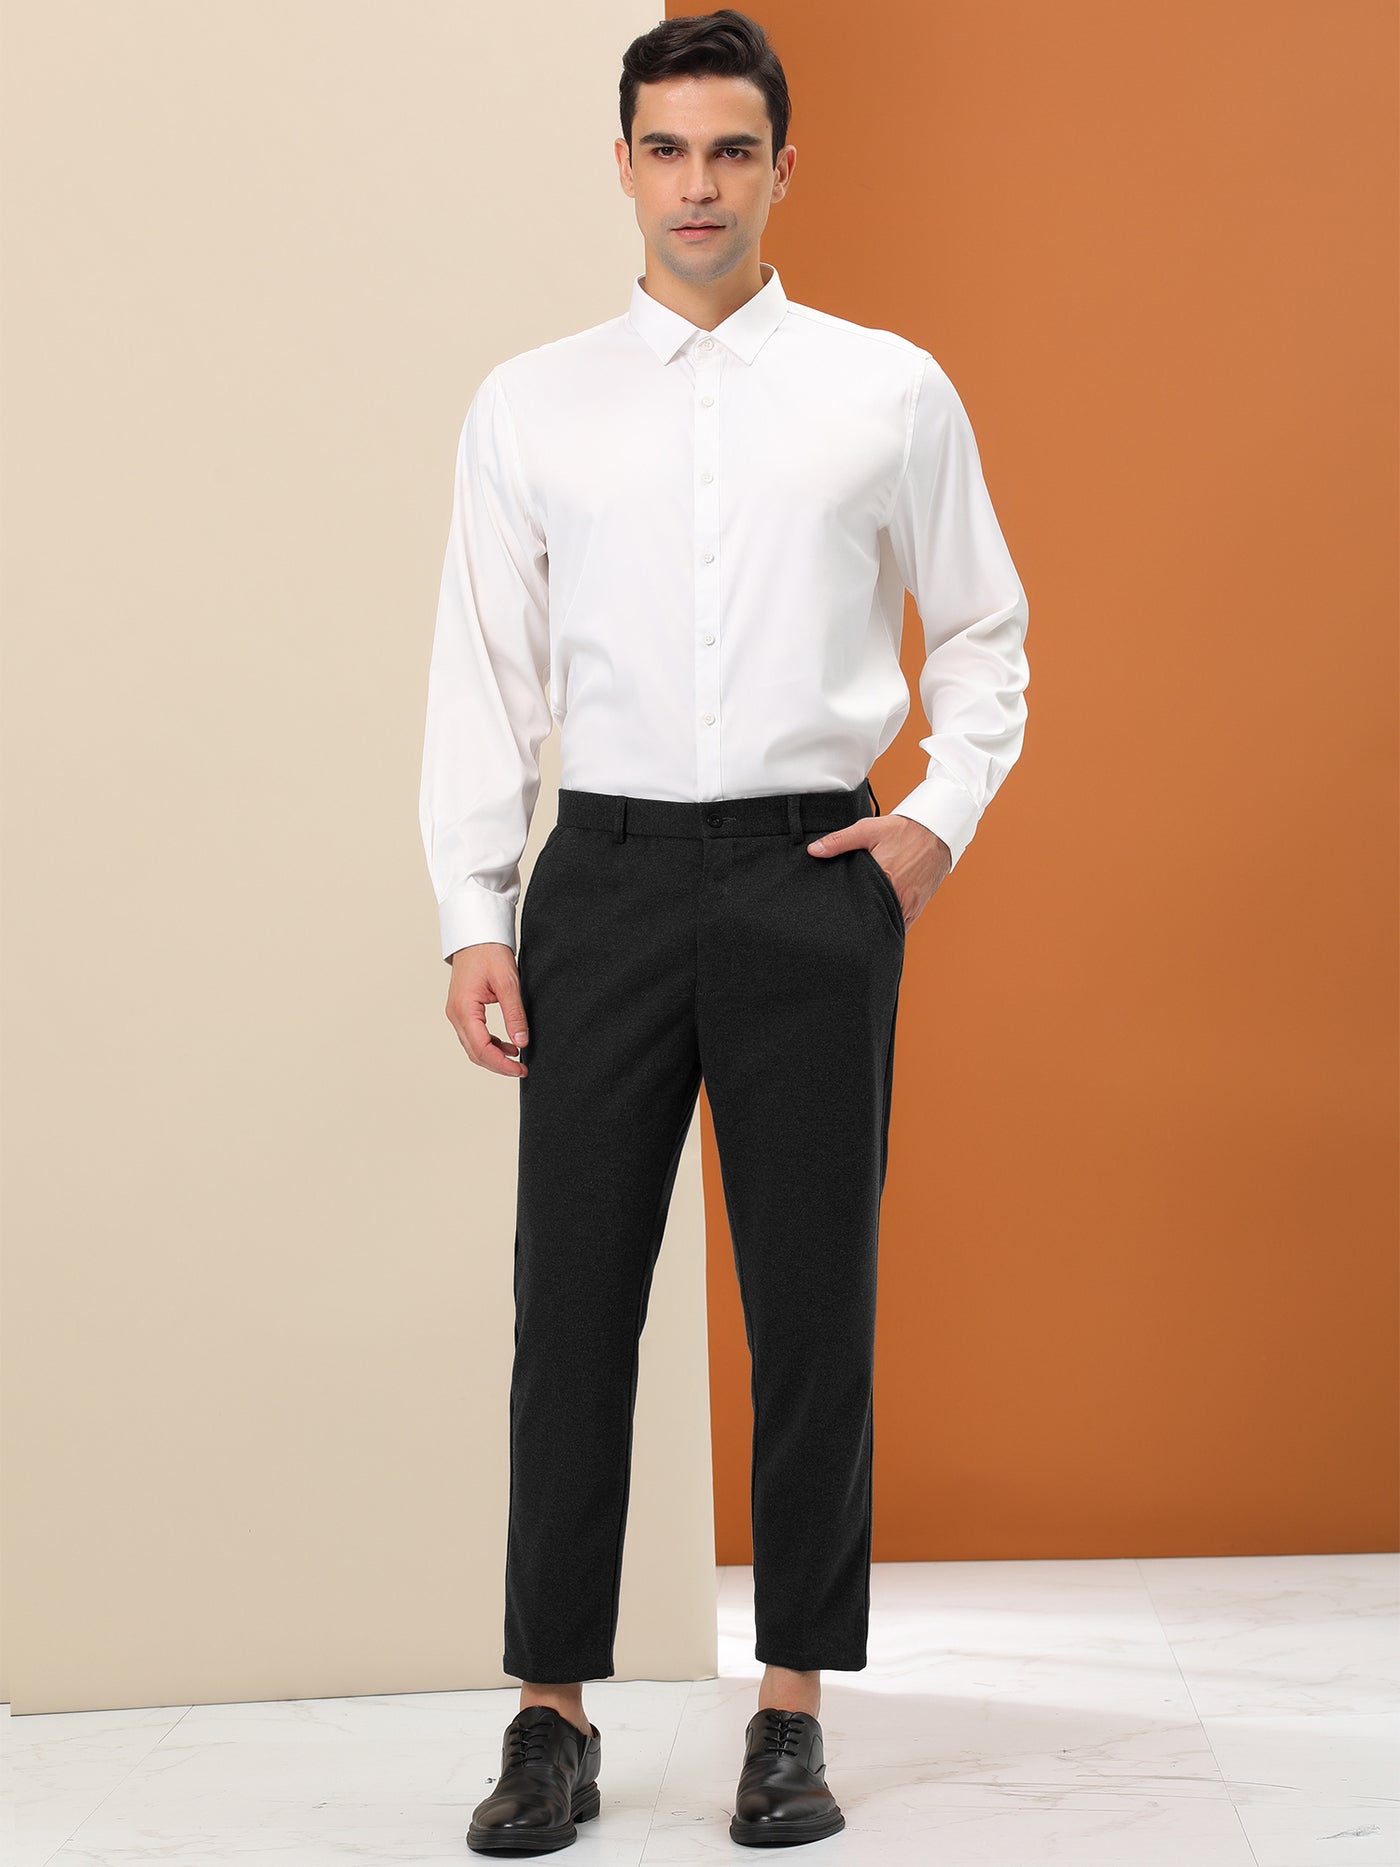 Bublédon Men's Prom Slim Fit Flat Front Solid Color Chino Cropped Dress Pants